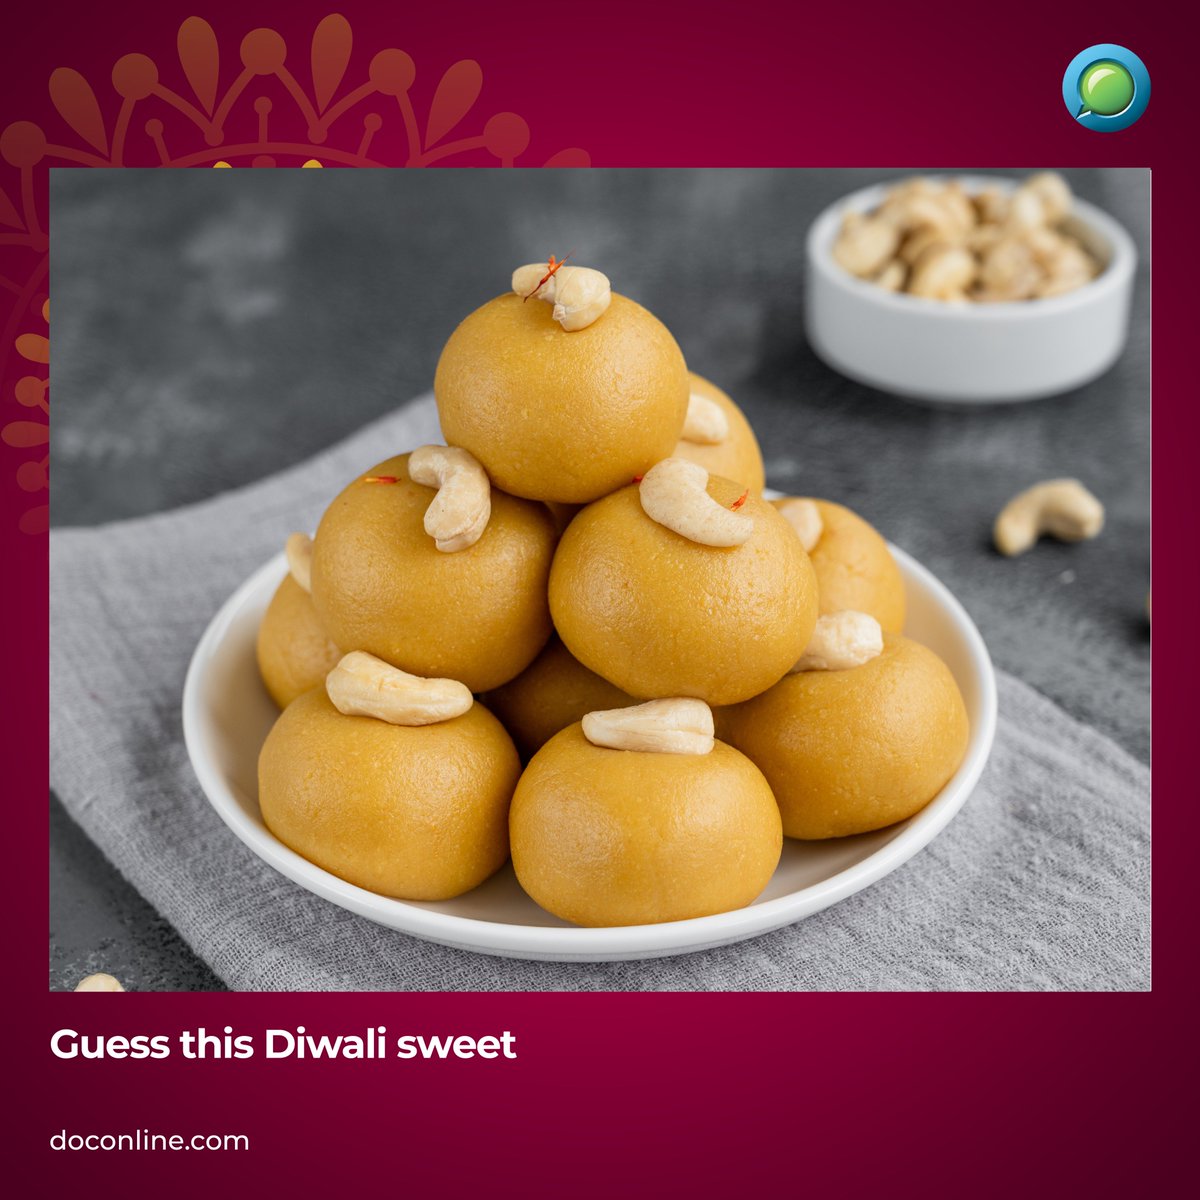 T&Cs Apply: lnkd.in/dABArwAR​

#DiwaliSweets #GuessTheSweets #DiwaliContest #DocOnline #DiwaliWithDocOnline #Contest #ContestAlert #Diwali2023 #Diwali #GuessTheAnswer